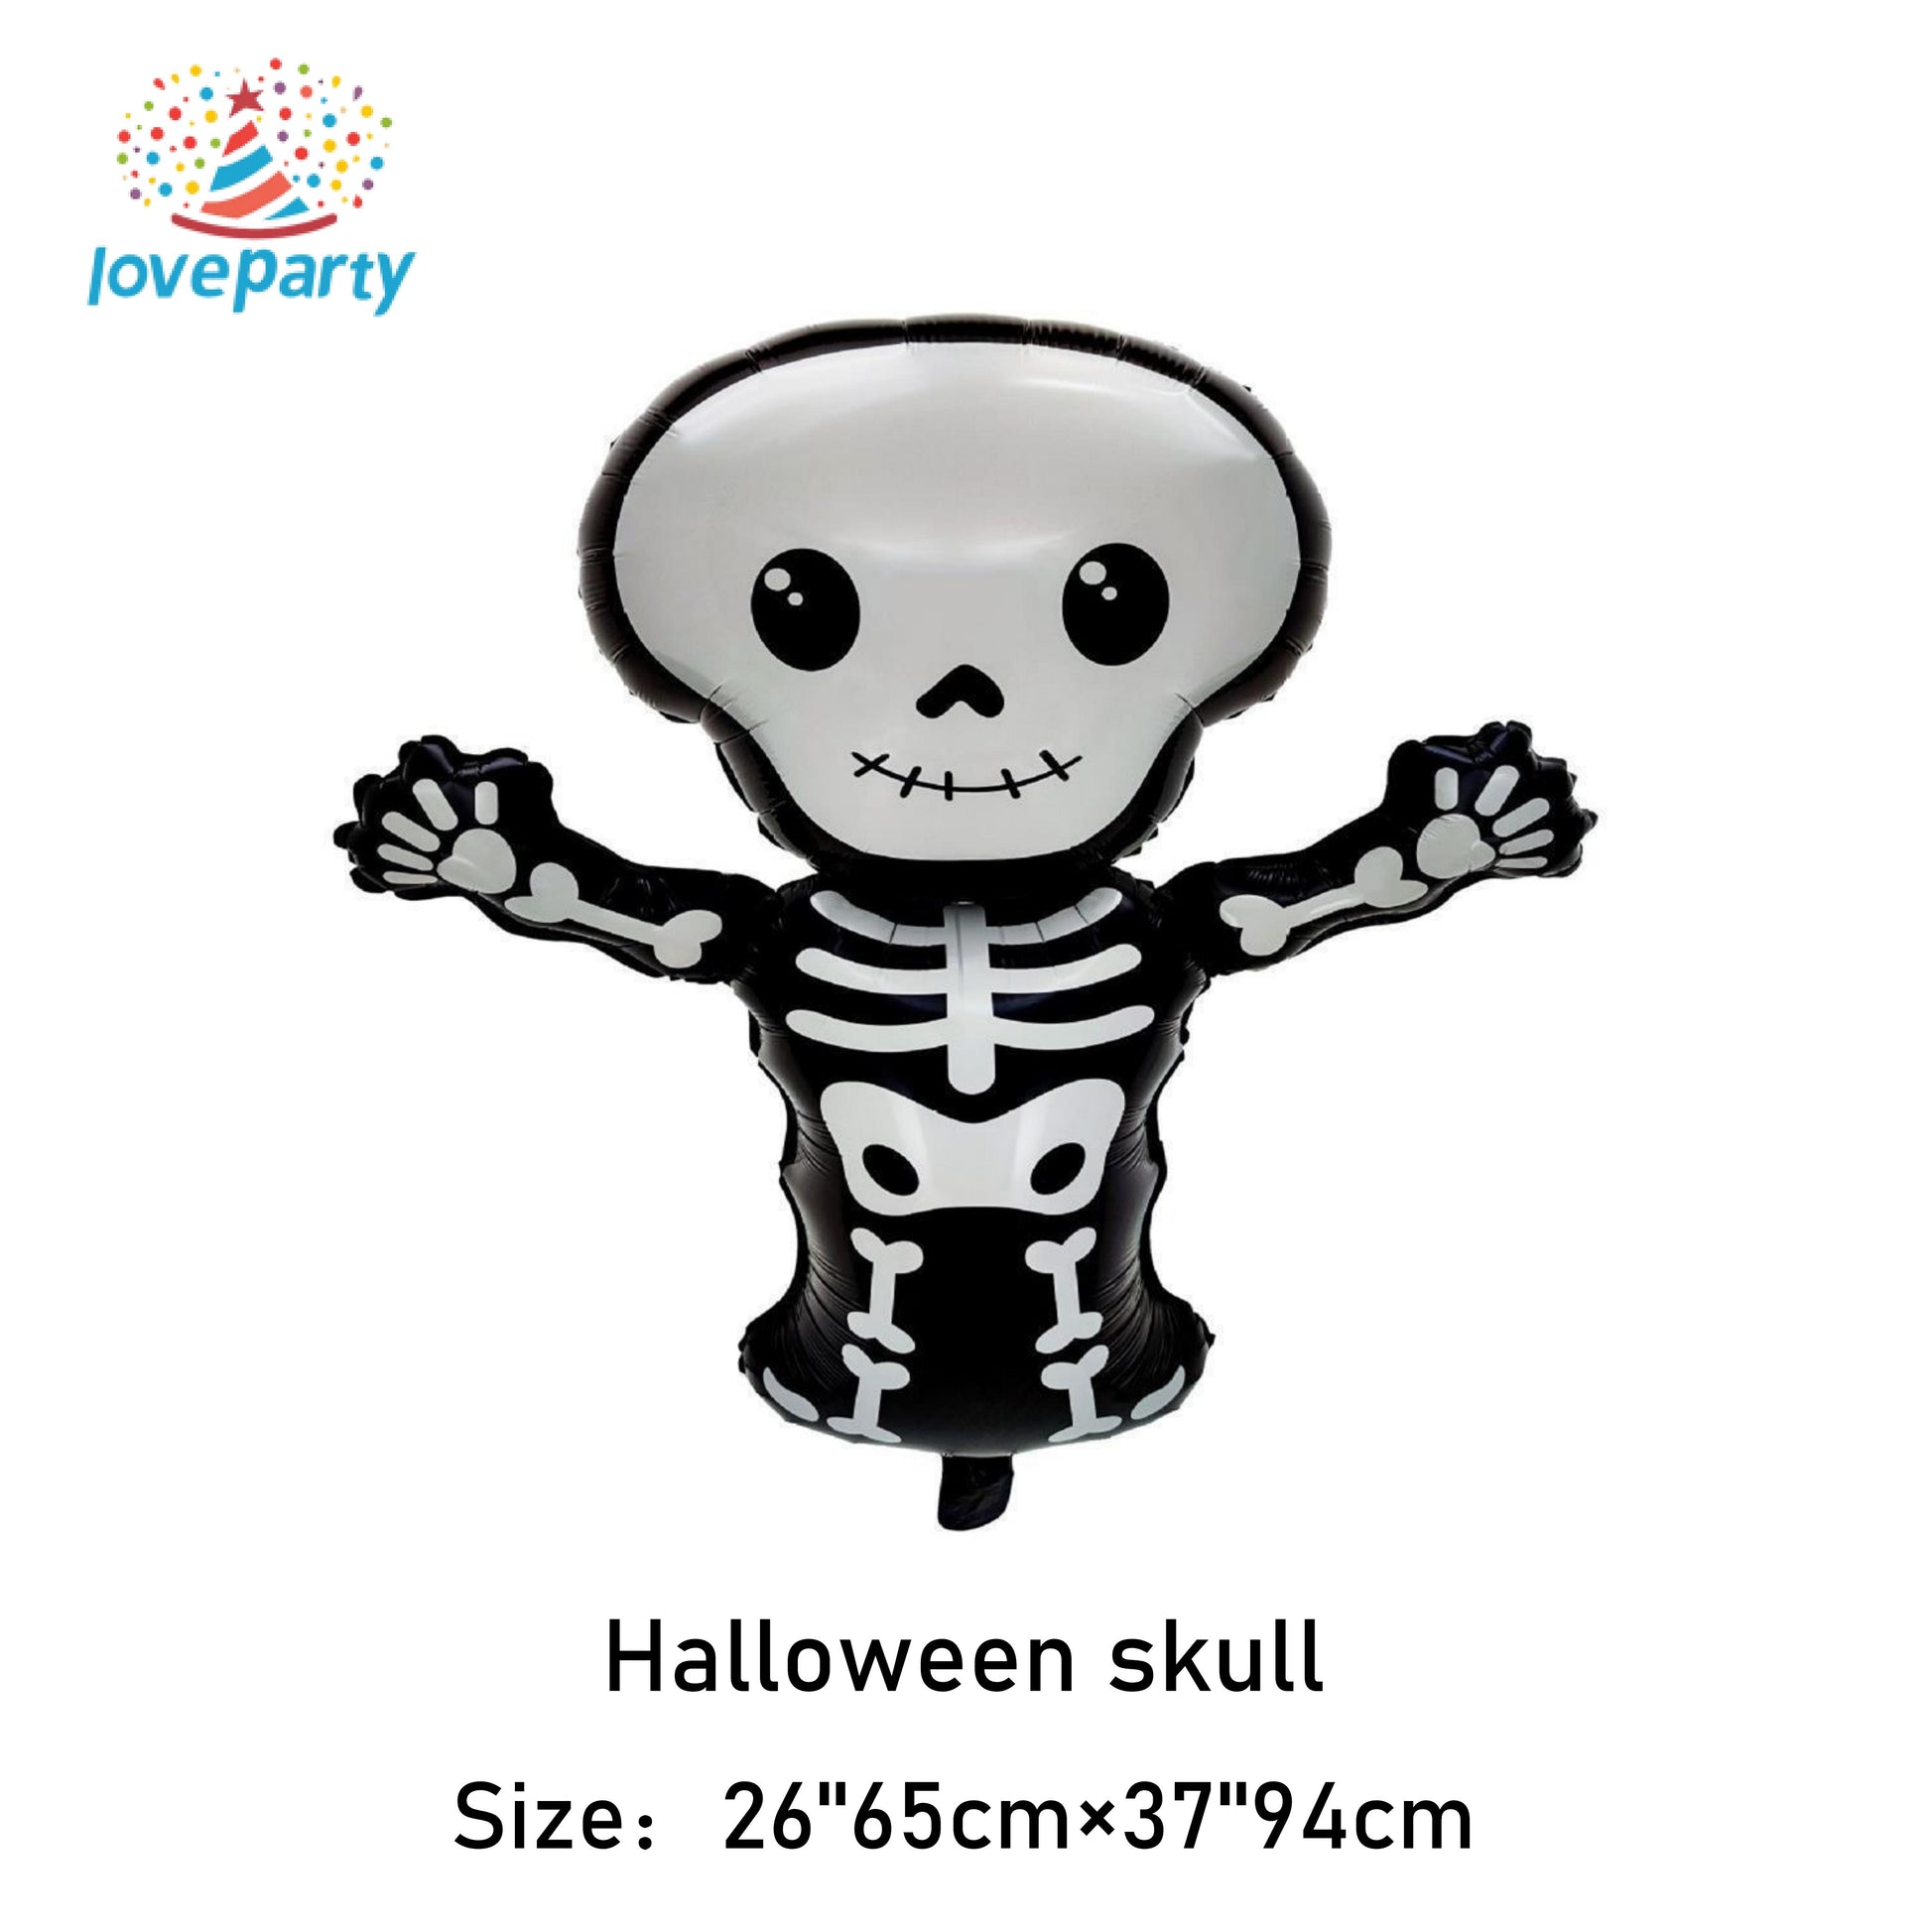 New Halloween Series Festival Party Decoration Aluminum Foil Balloons Dark Skeleton Creative and Quirky Witch Pumpkin